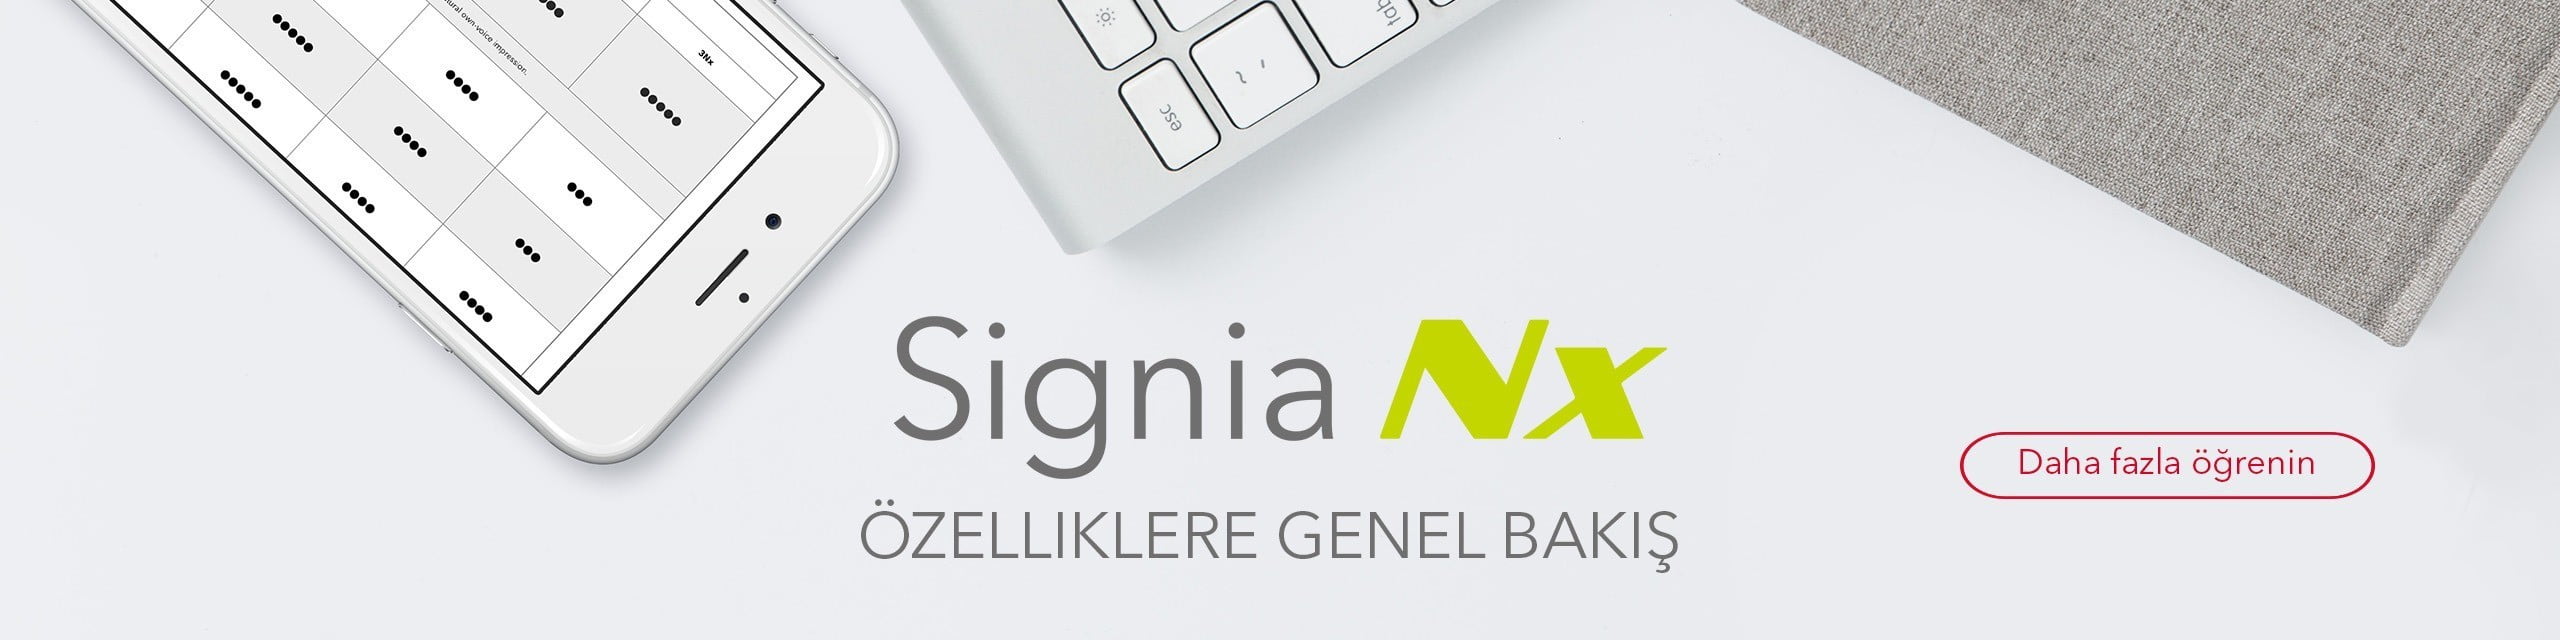 Signia NX TR ozellikler - Pure Charge&Go Nx